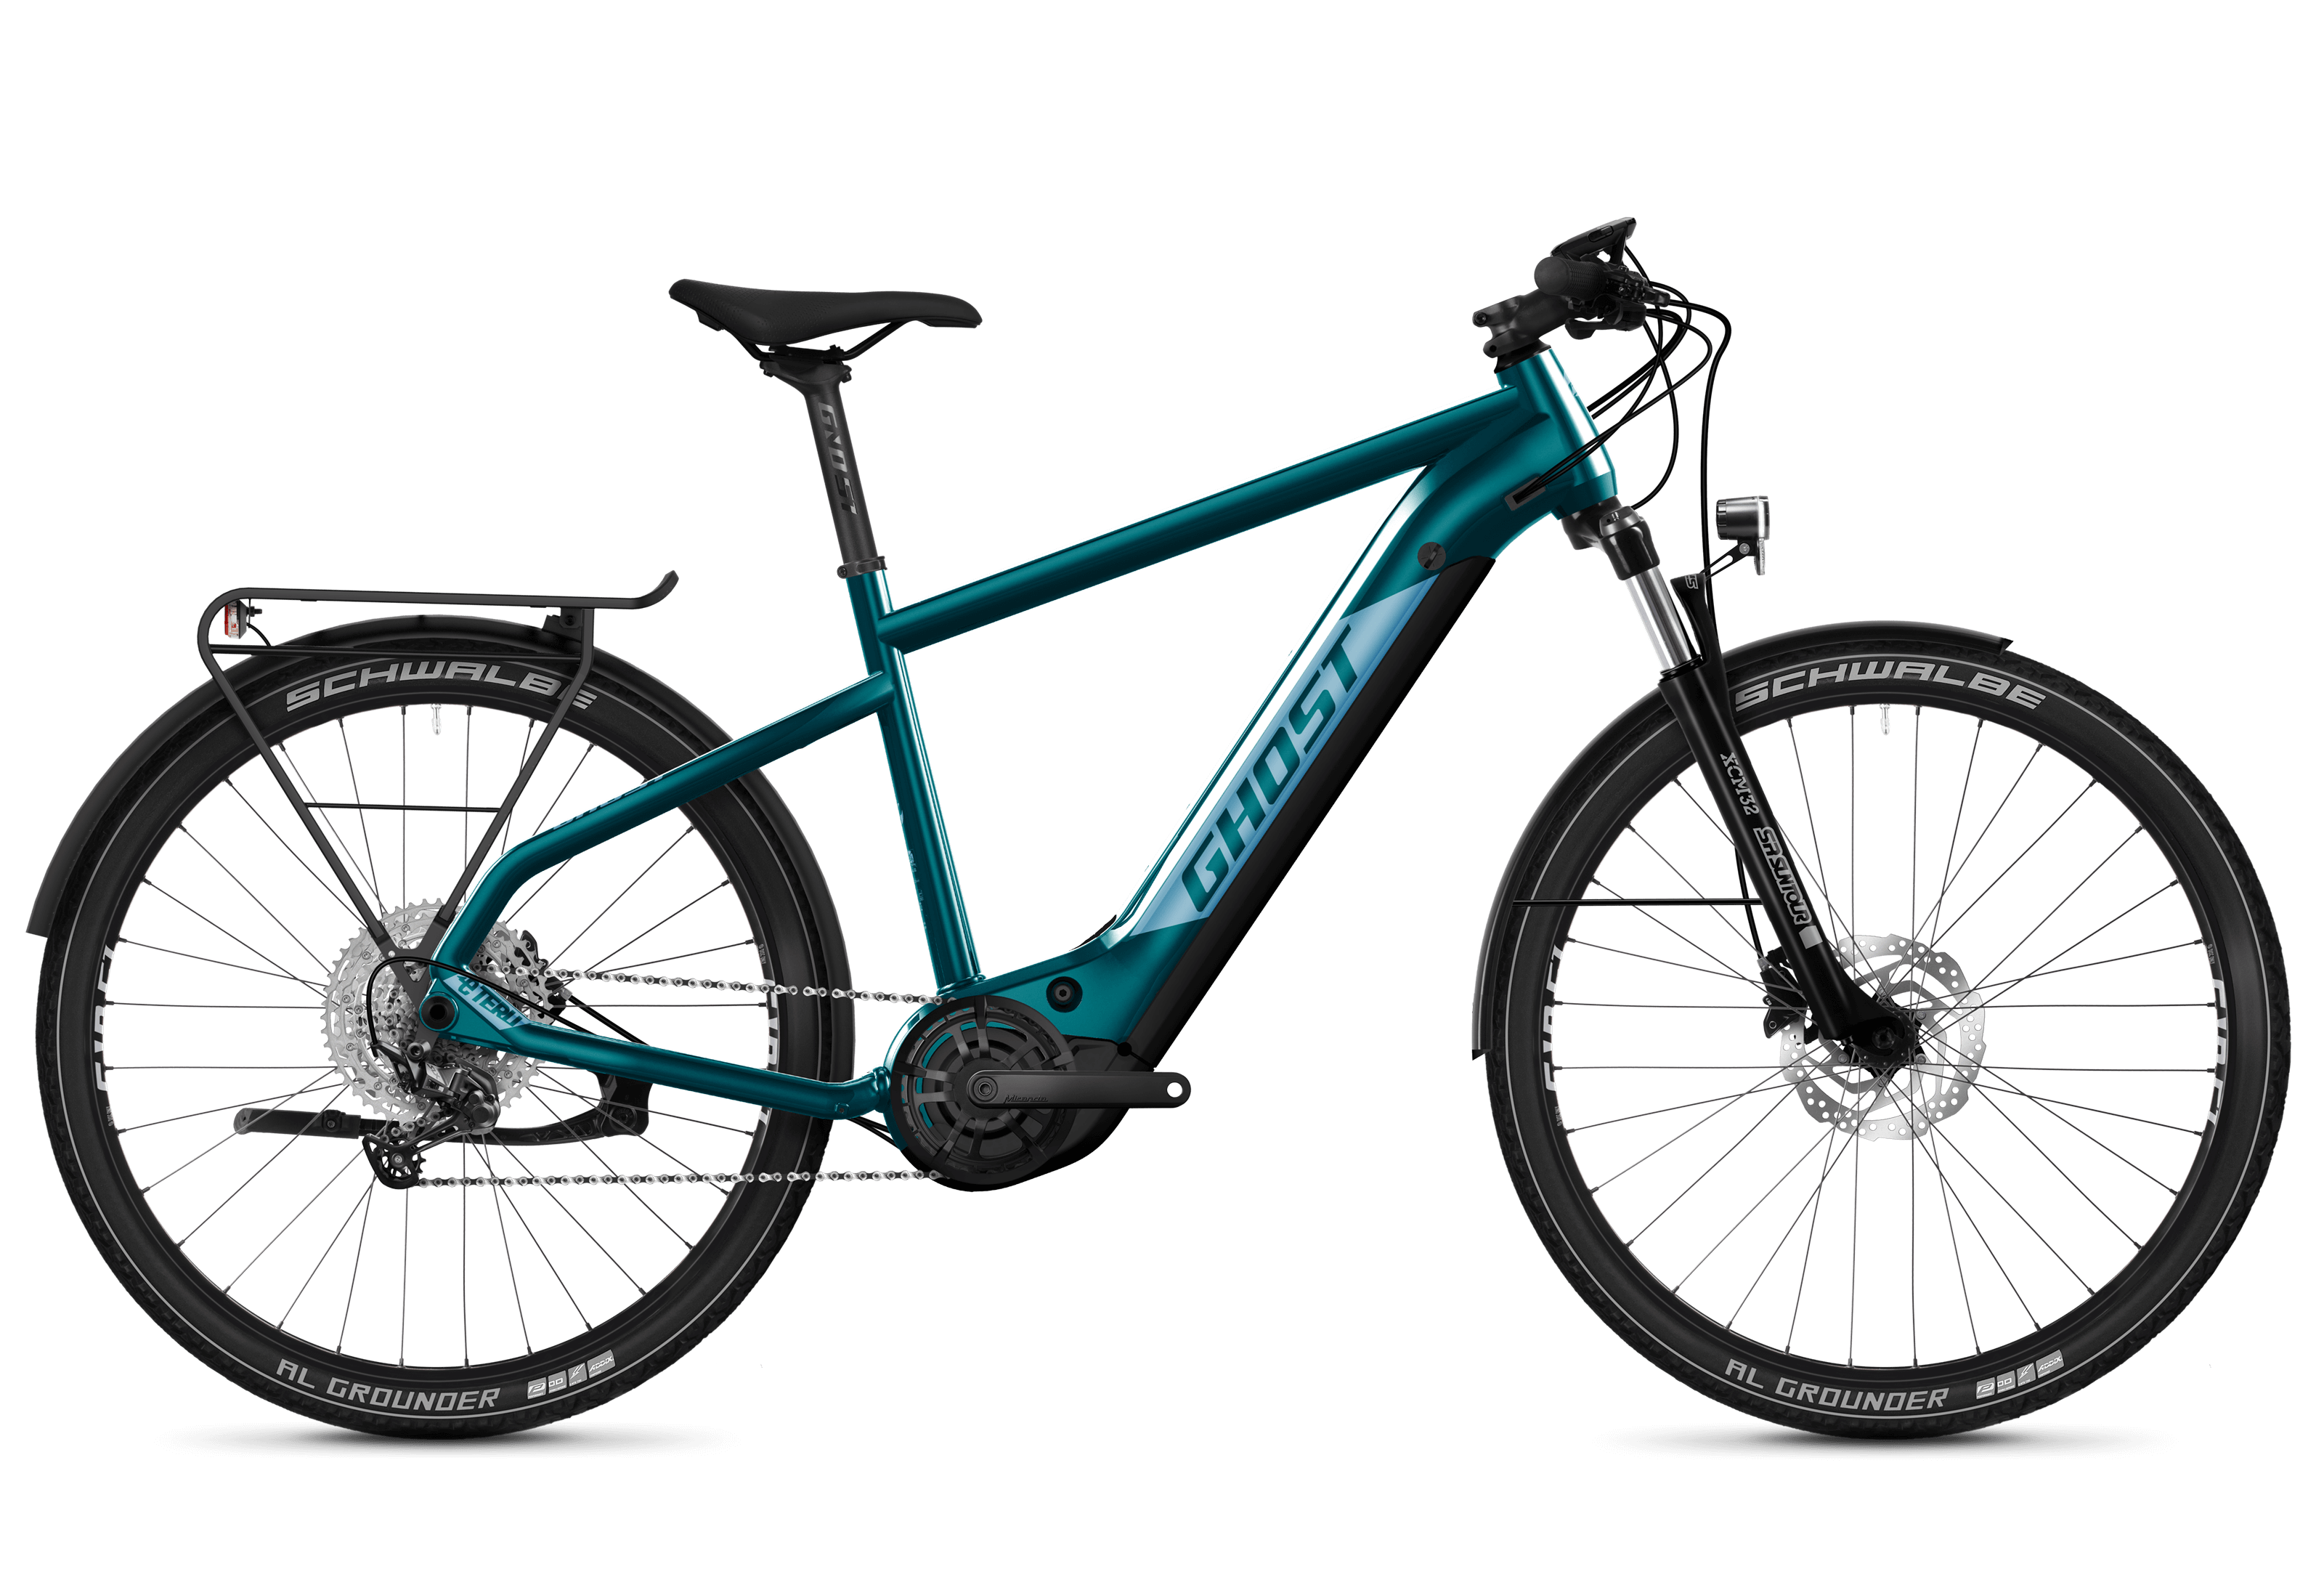 GHOST Electric bikes designed in Germany